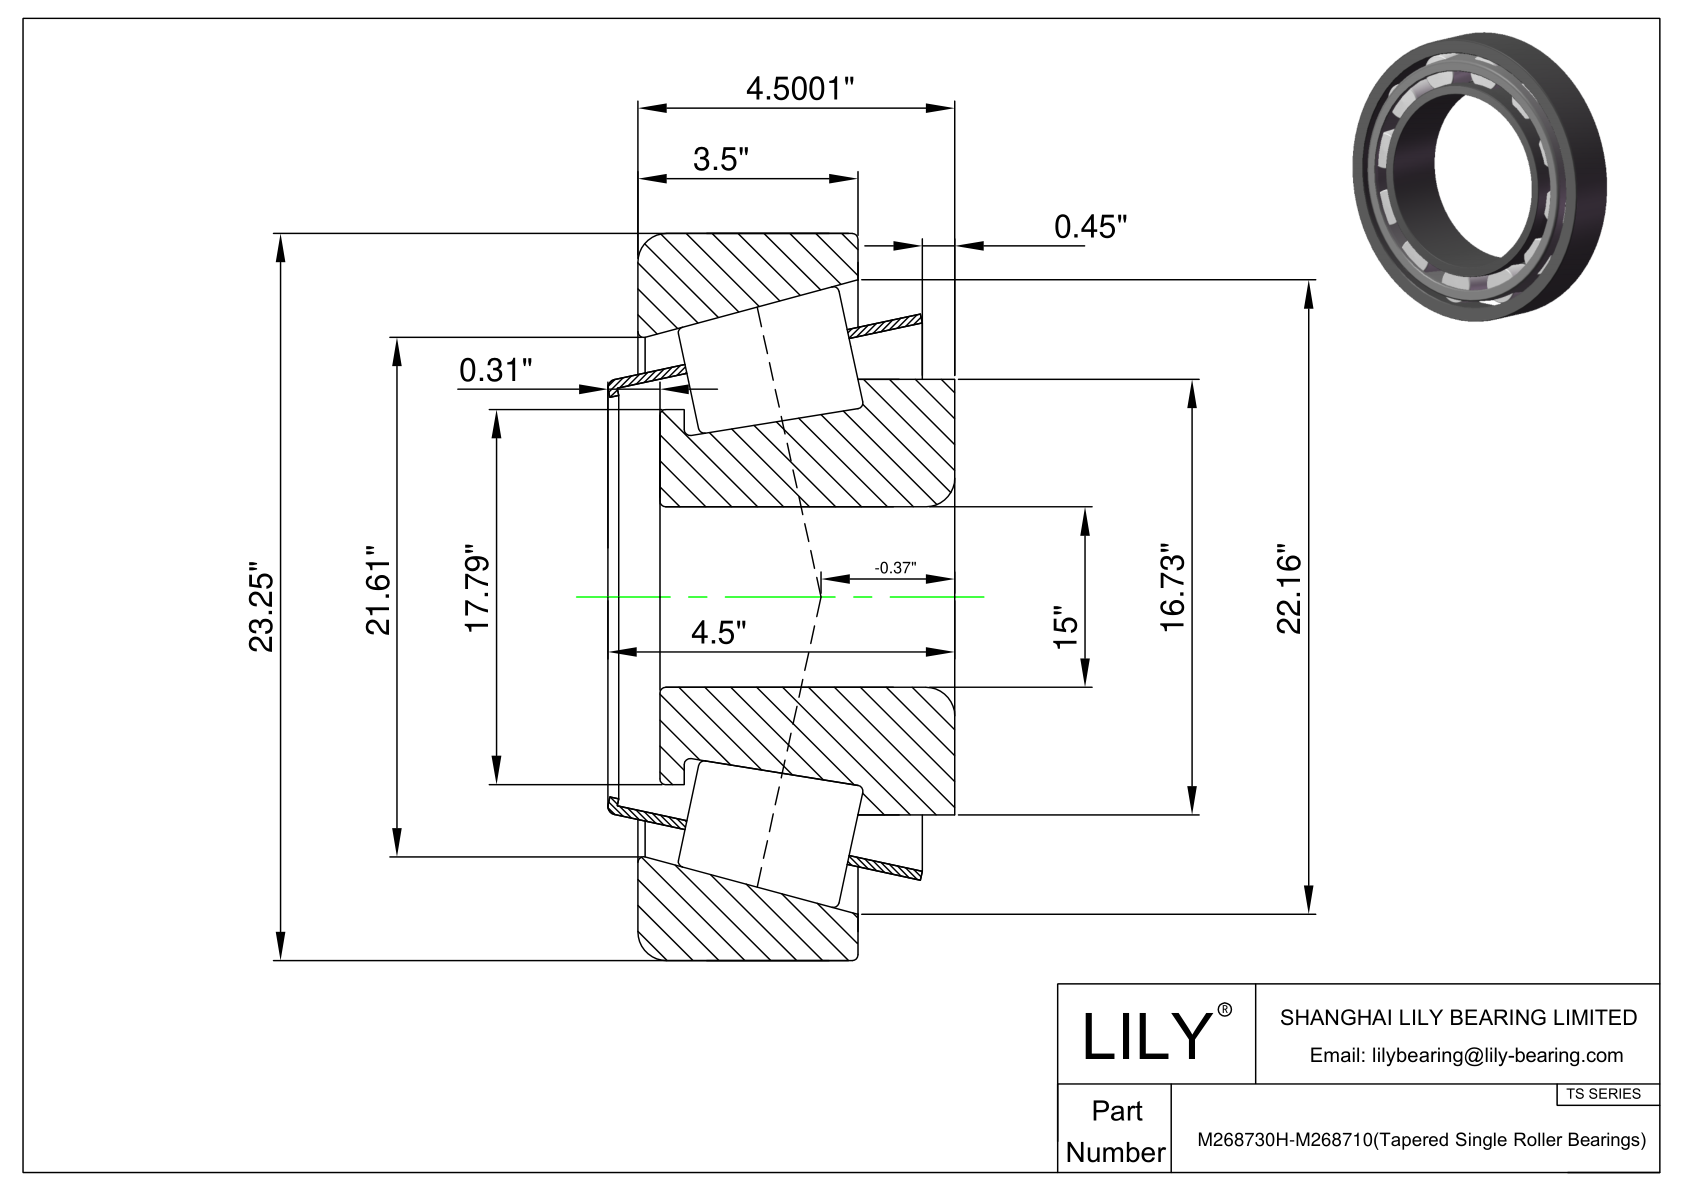 M268730H-M268710 TS (Tapered Single Roller Bearings) (Imperial) cad drawing